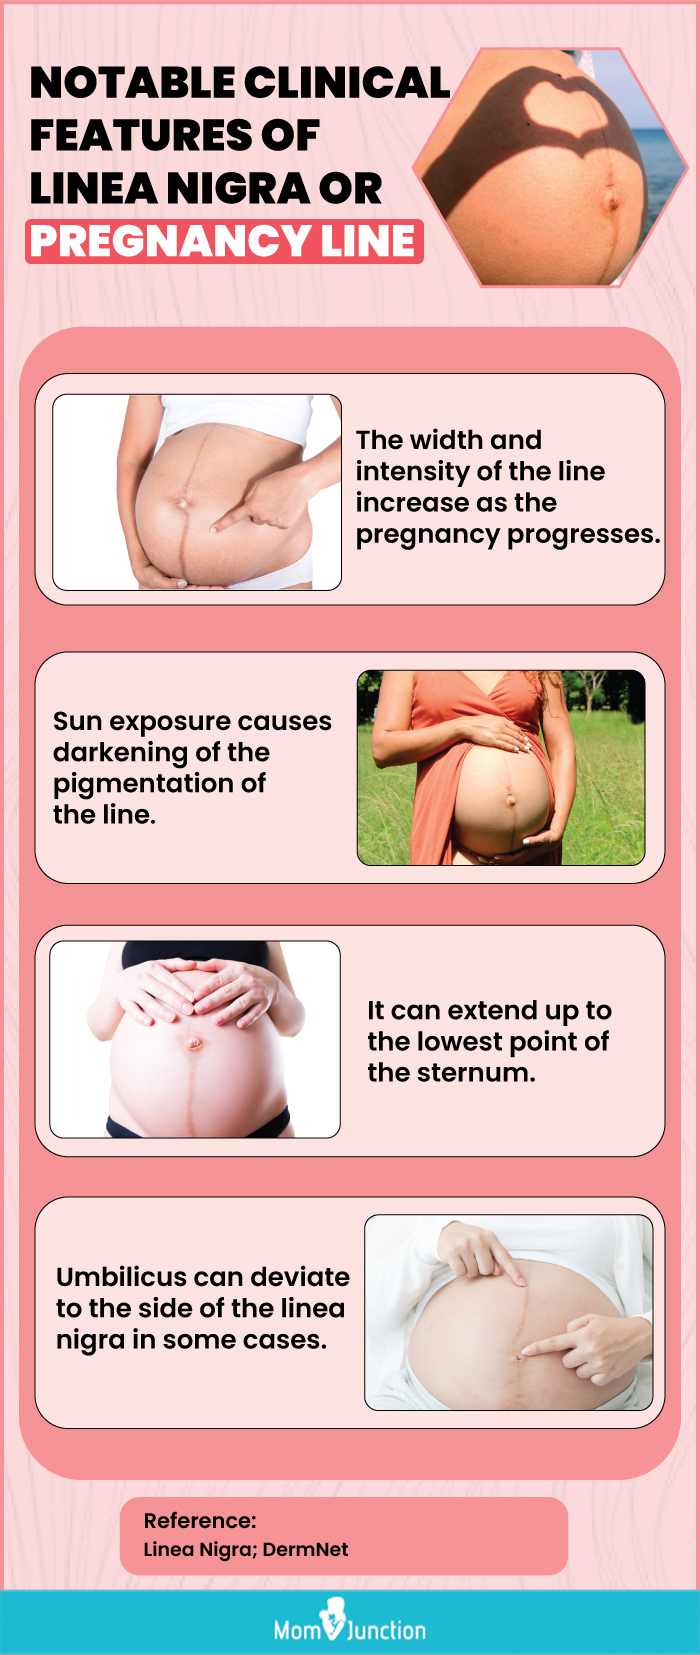 notable clinical features of liea nigra or pregnancy line (infographic)